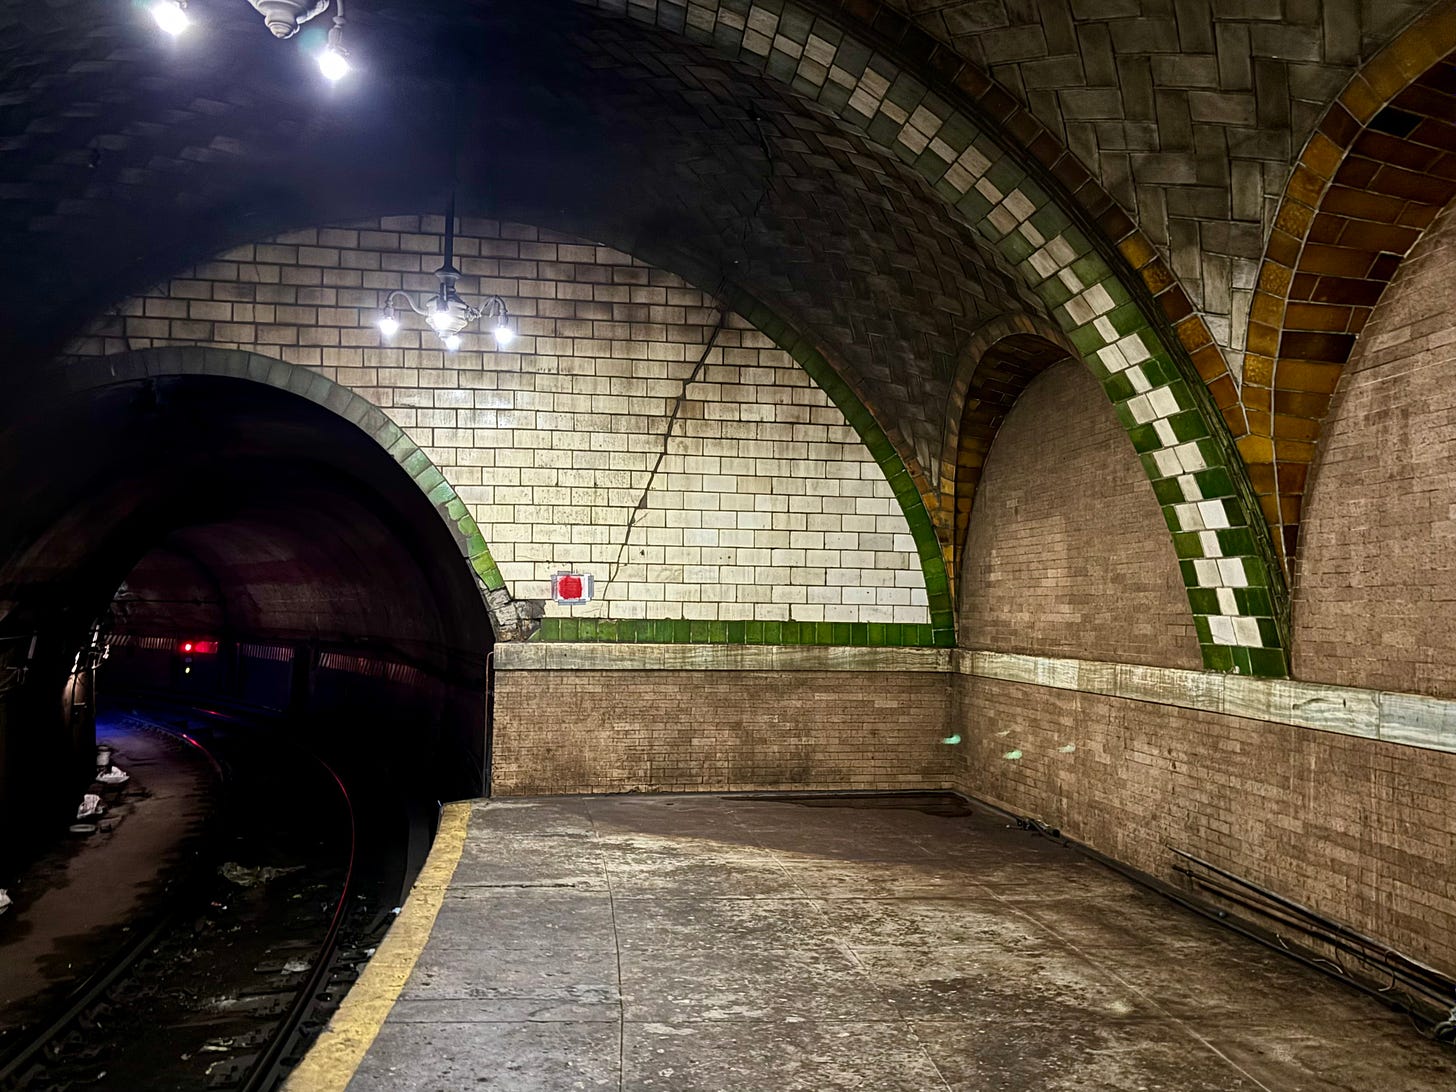 The far edge of the subway platform. Green and amber tiles meet at the corners of the vaulted arches.